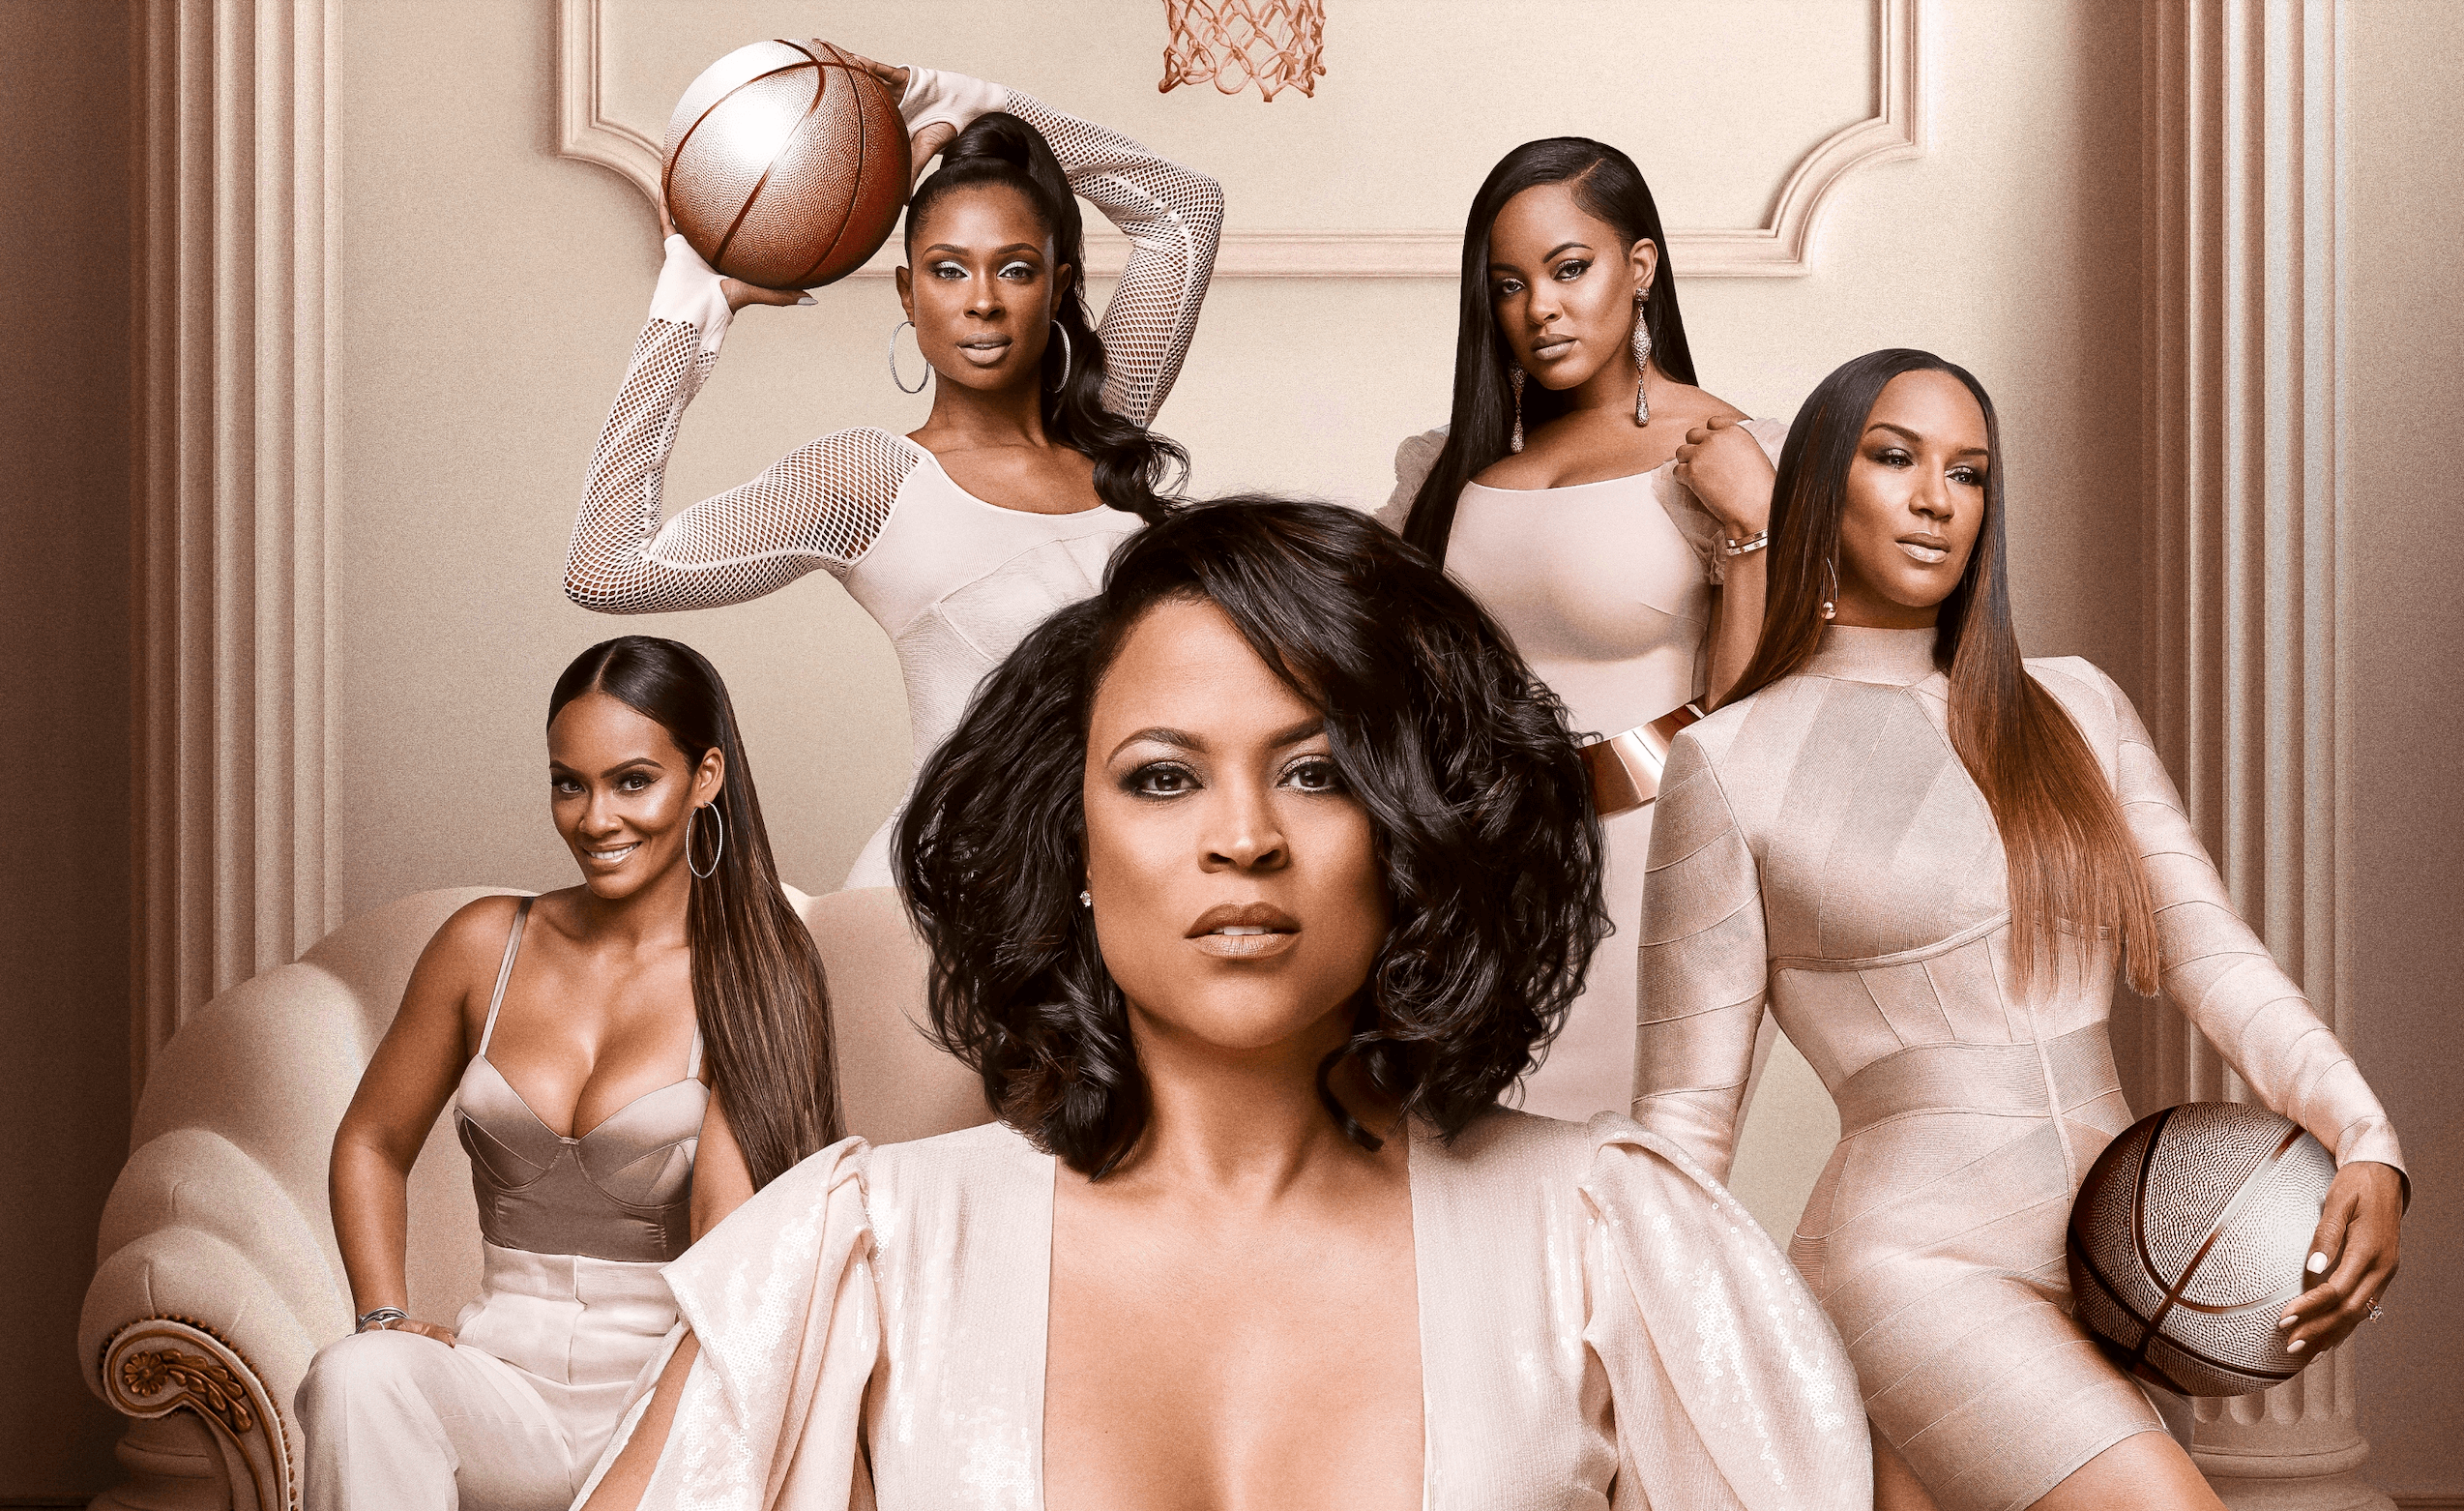 ‘I’m Not Taking No Sh*t!’ Get A First Look At ‘Basketball Wives’ Season 9!